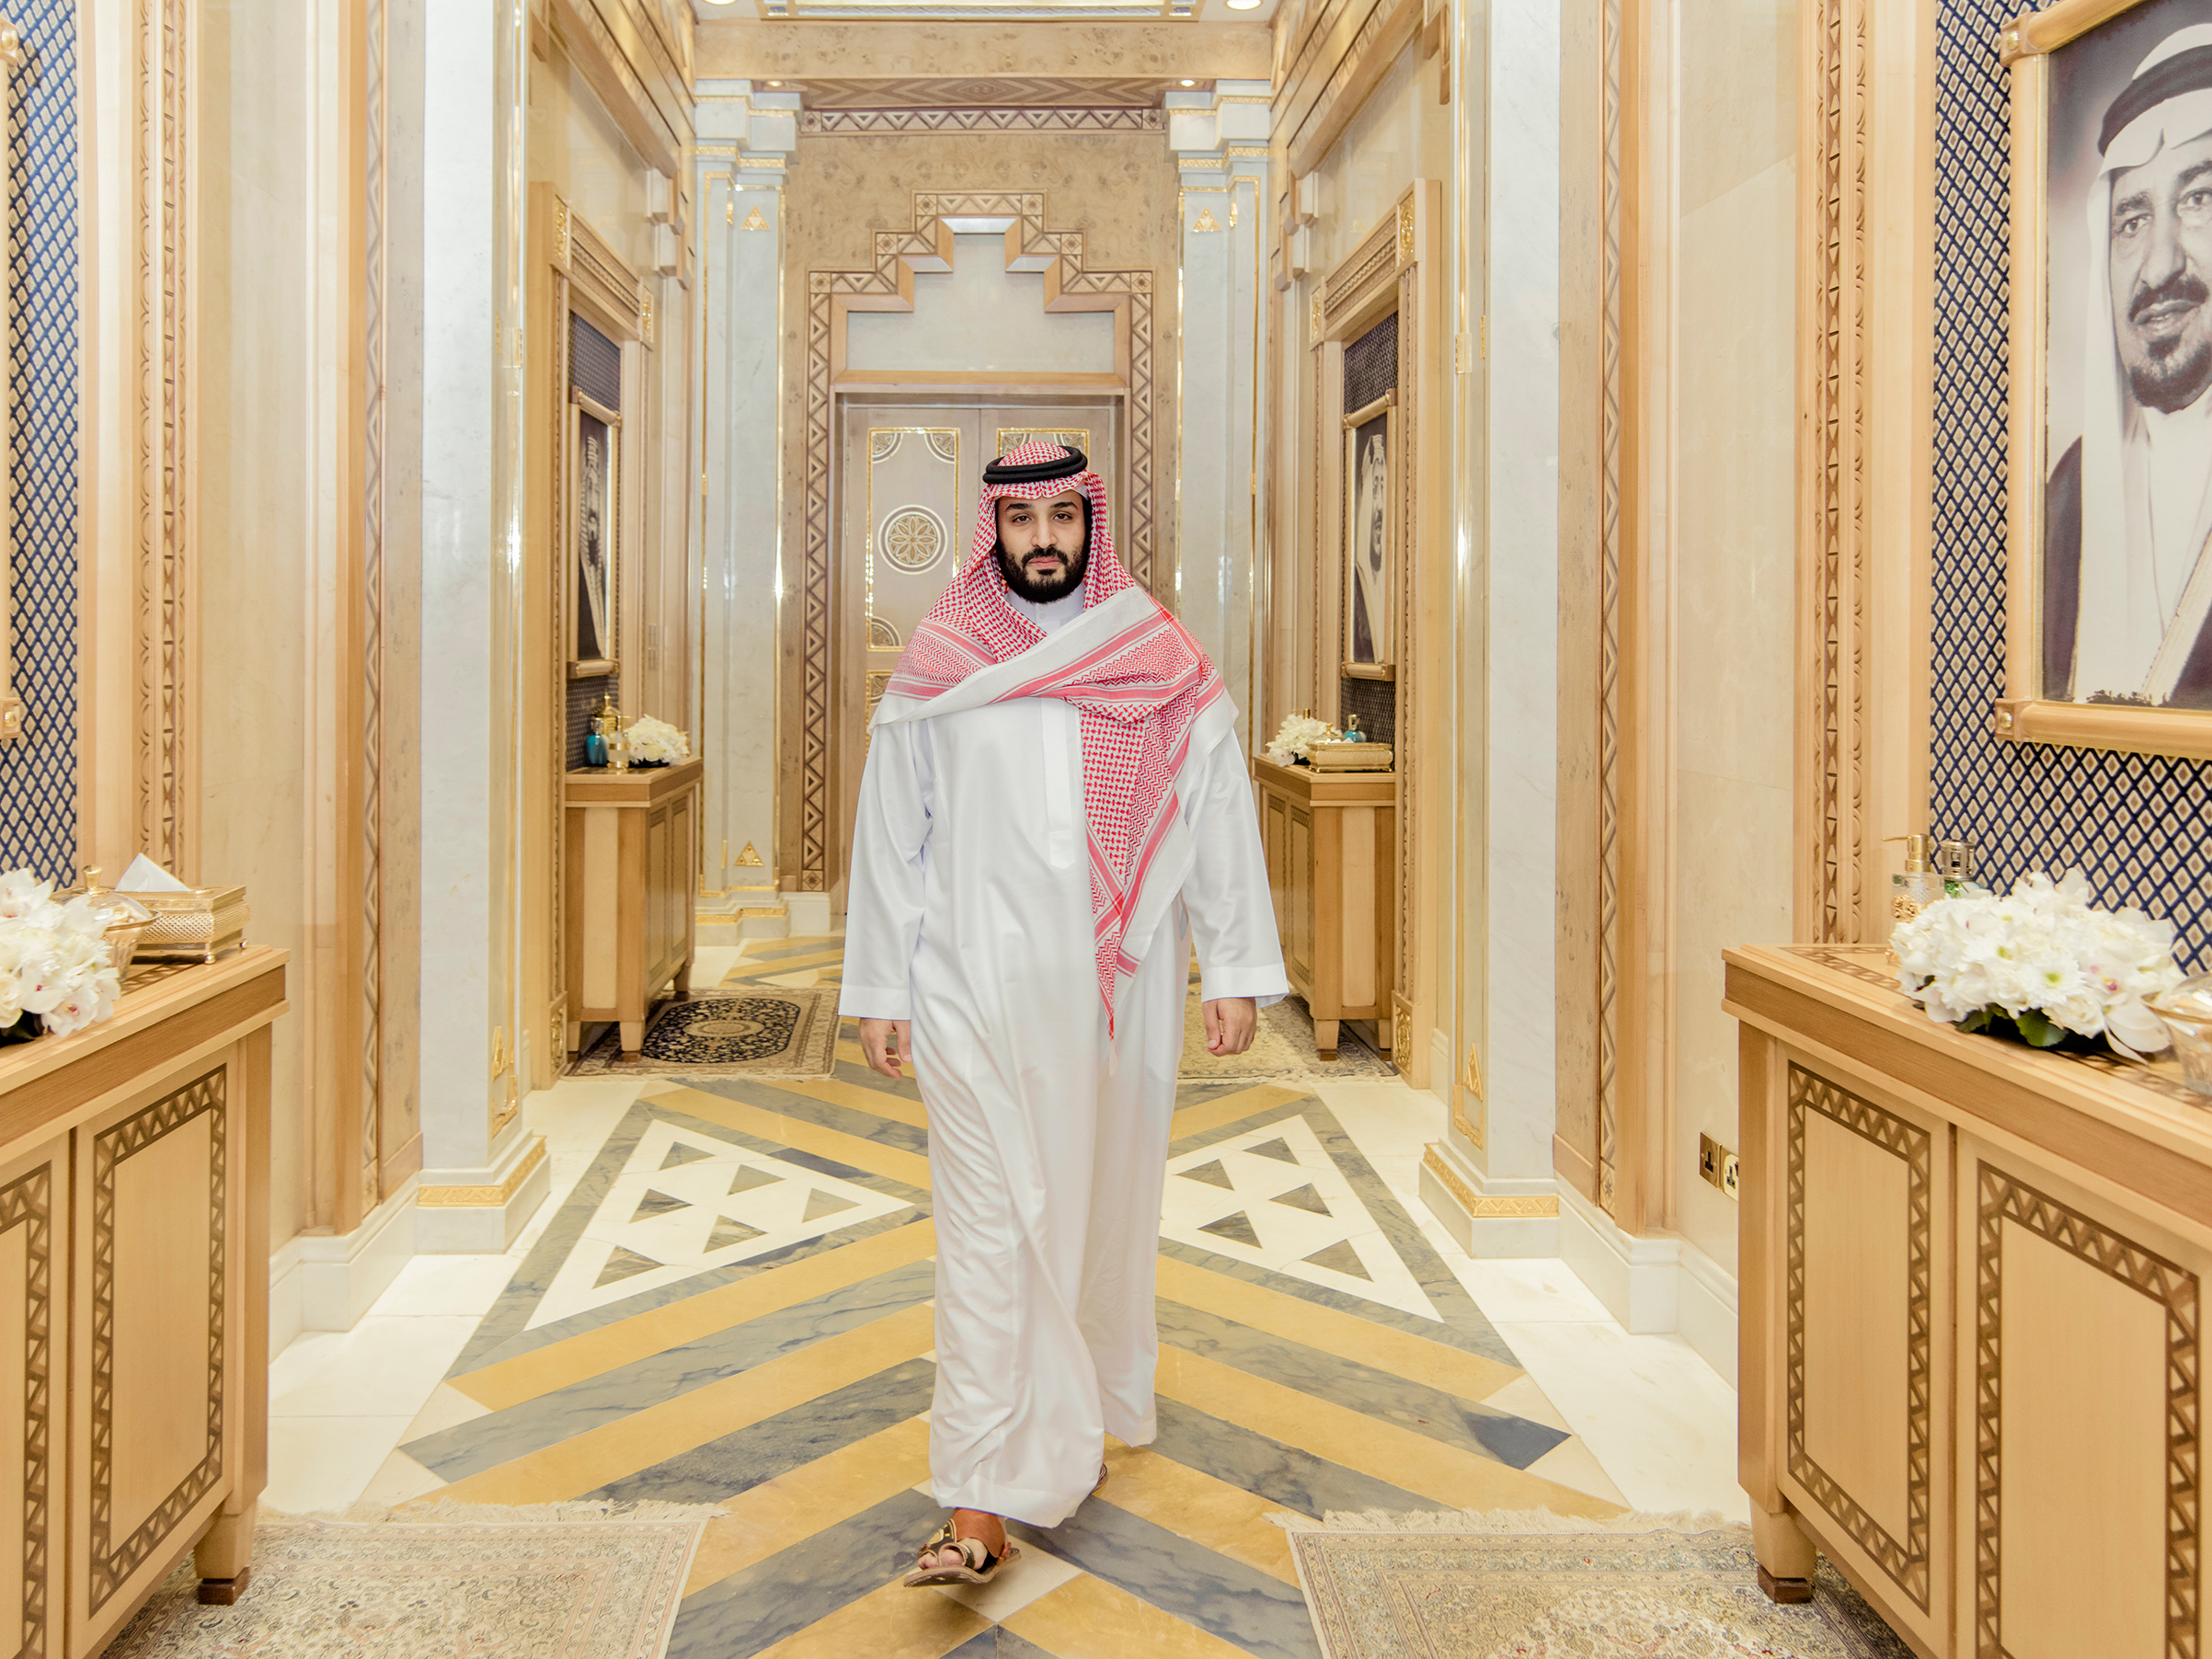 At 32, Mohammed bin Salman is the most powerful Saudi royal in decades (Luca Locatelli)